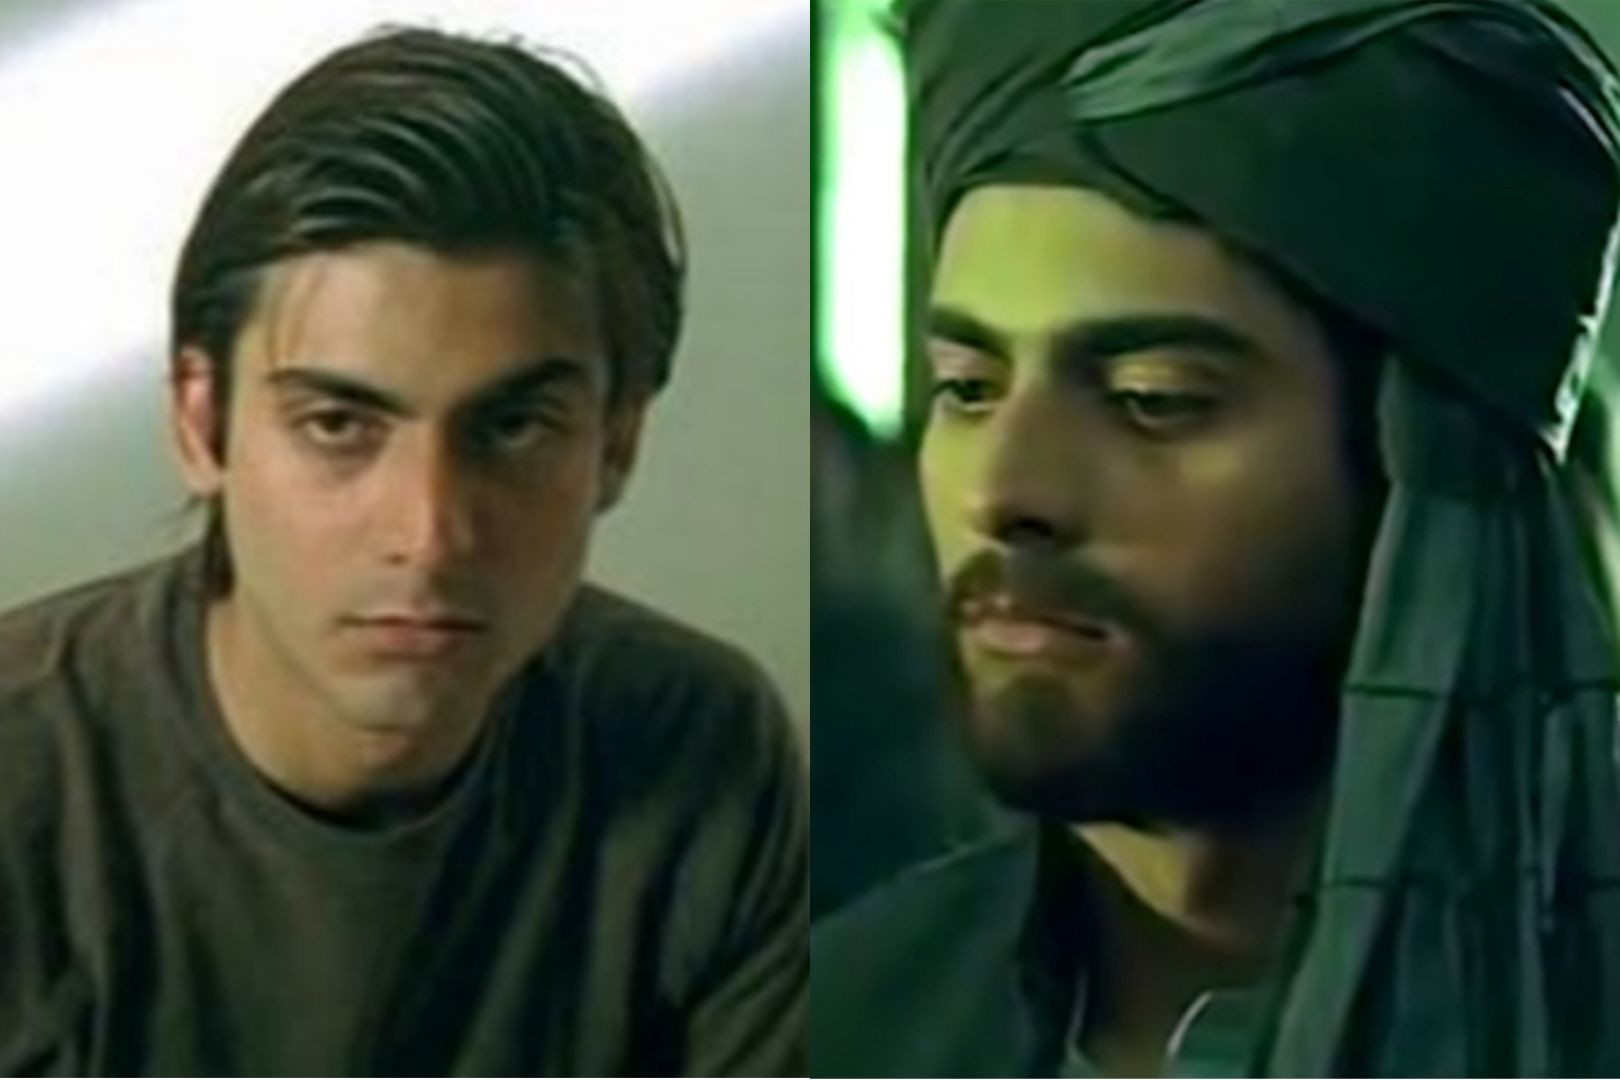 Sarmad, played by Fawad Khan, becomes Talibanised over the course of the film